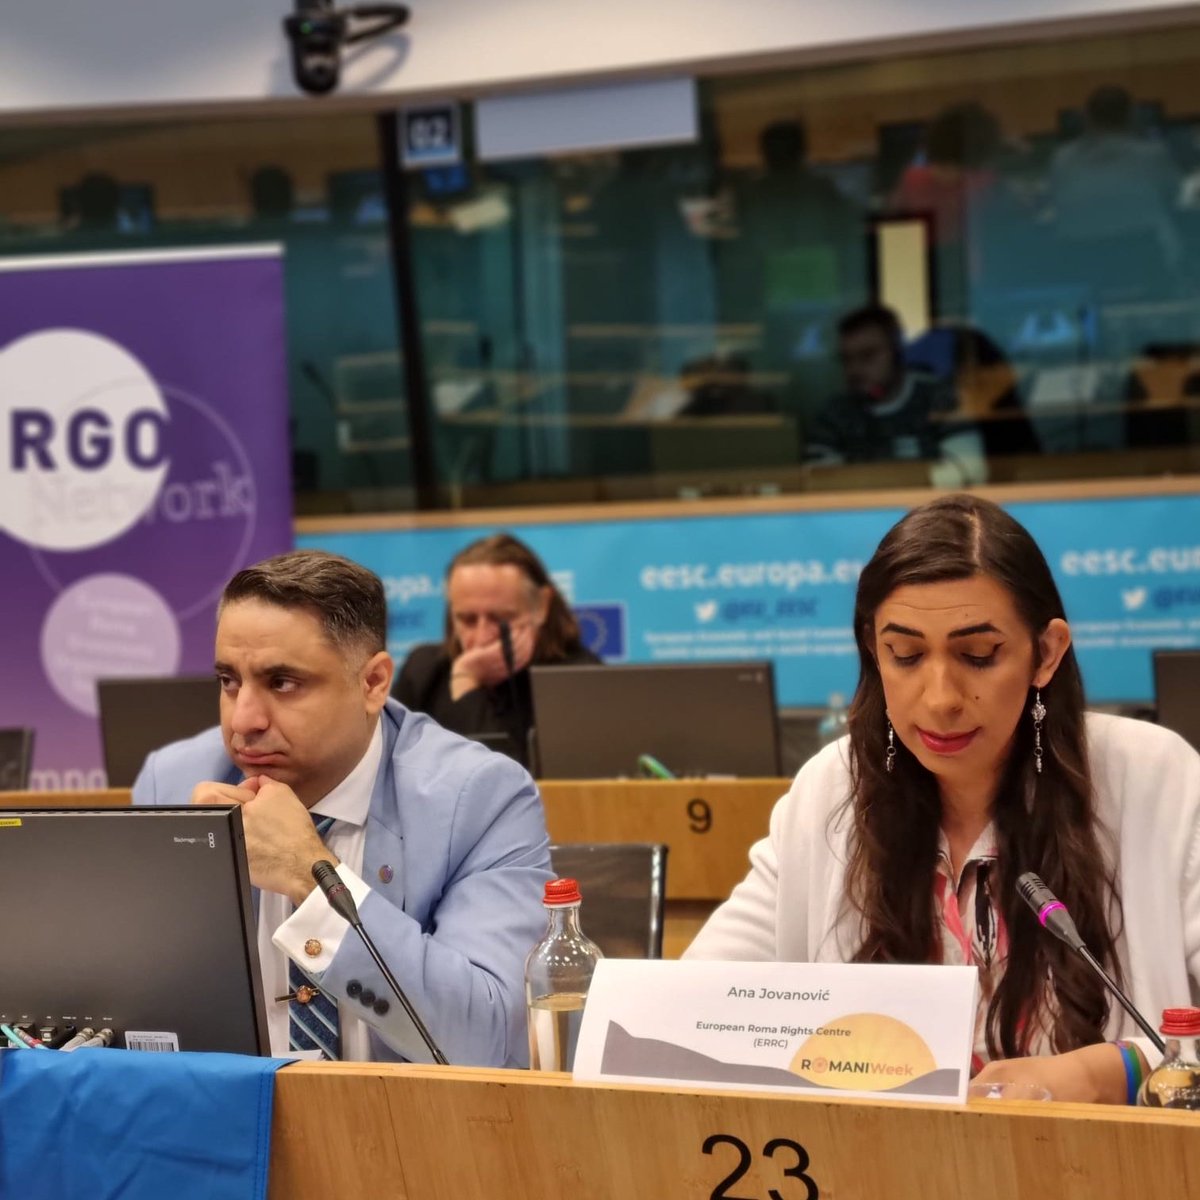 Ana Jovanović presents the important role of @ERRCtweets, working towards zero tolerance for antigypsyism in wider public and authorities. Two innovative examples are its work on combating digital antigypsyism and the fight against oppression of LGBT+Roma. #RomaniWeek2024